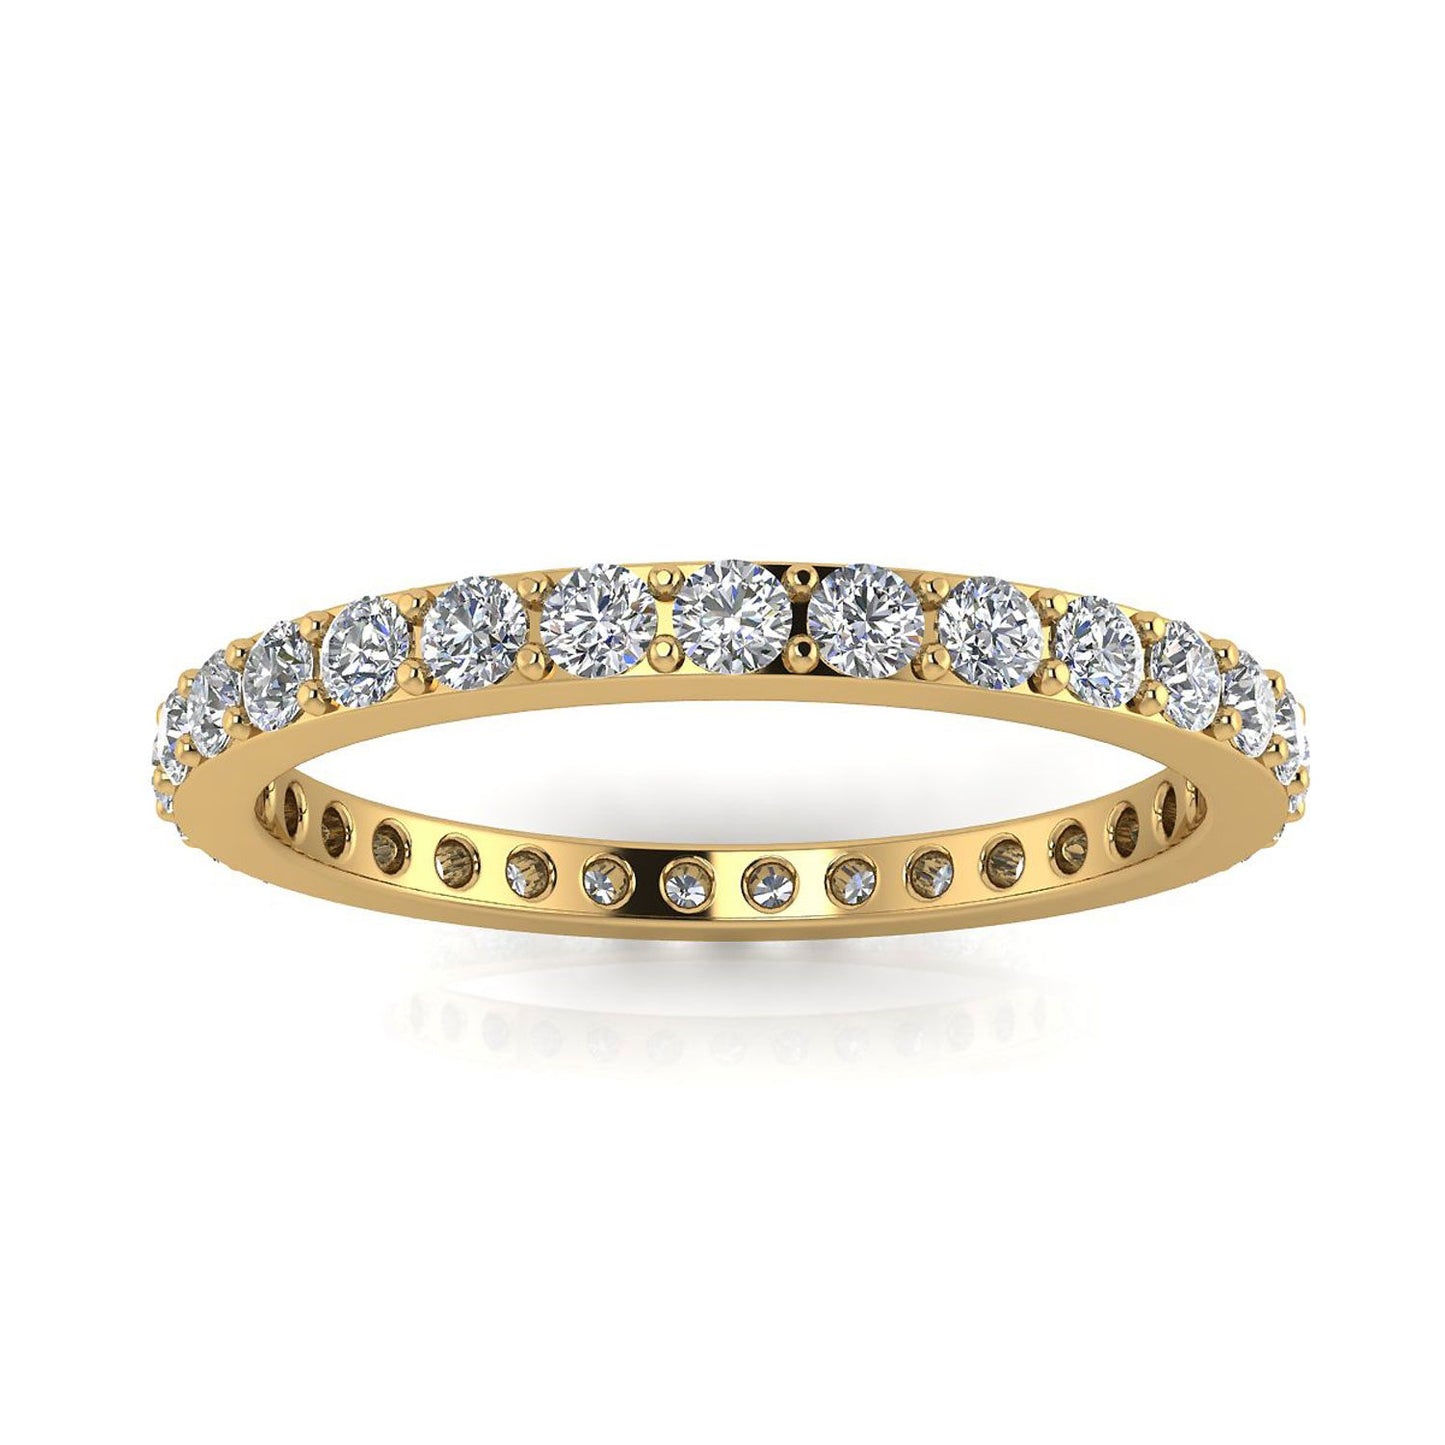 Round Brilliant Cut Diamond Pave Set Eternity Ring In 18k Yellow Gold  (0.51ct. Tw.) Ring Size 8.5